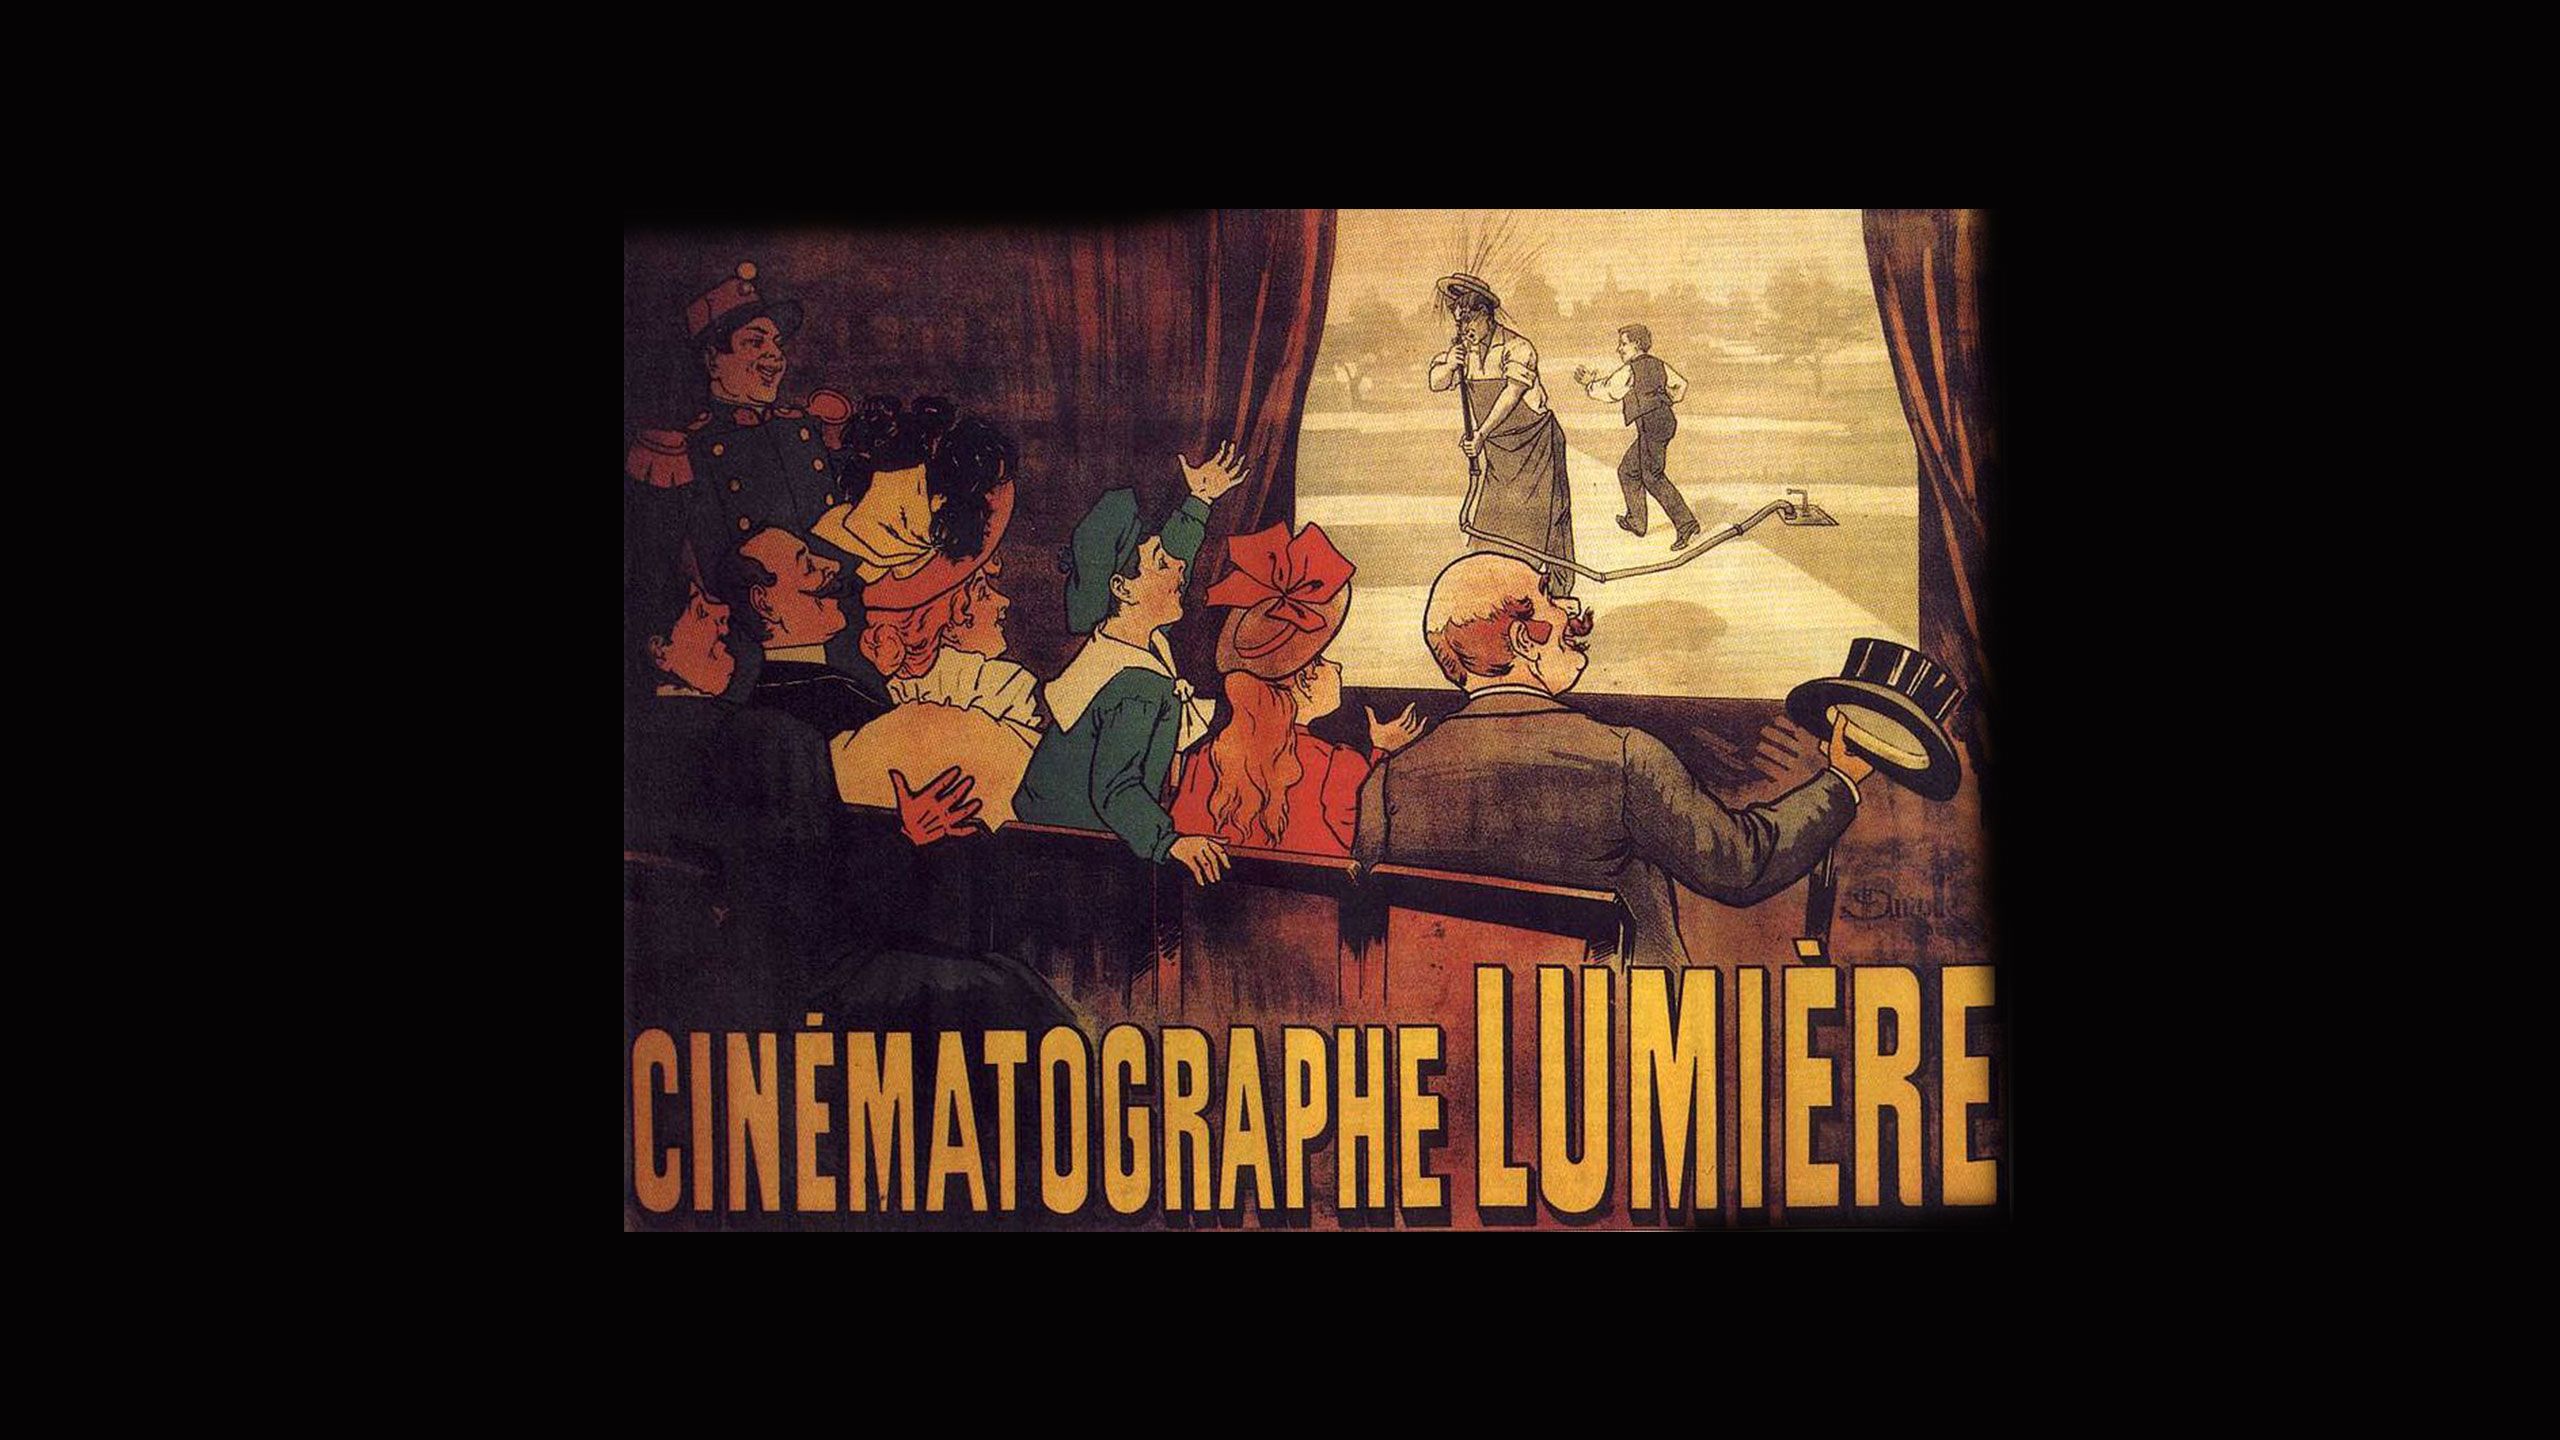 An illustrated poster showing an audience watching a film